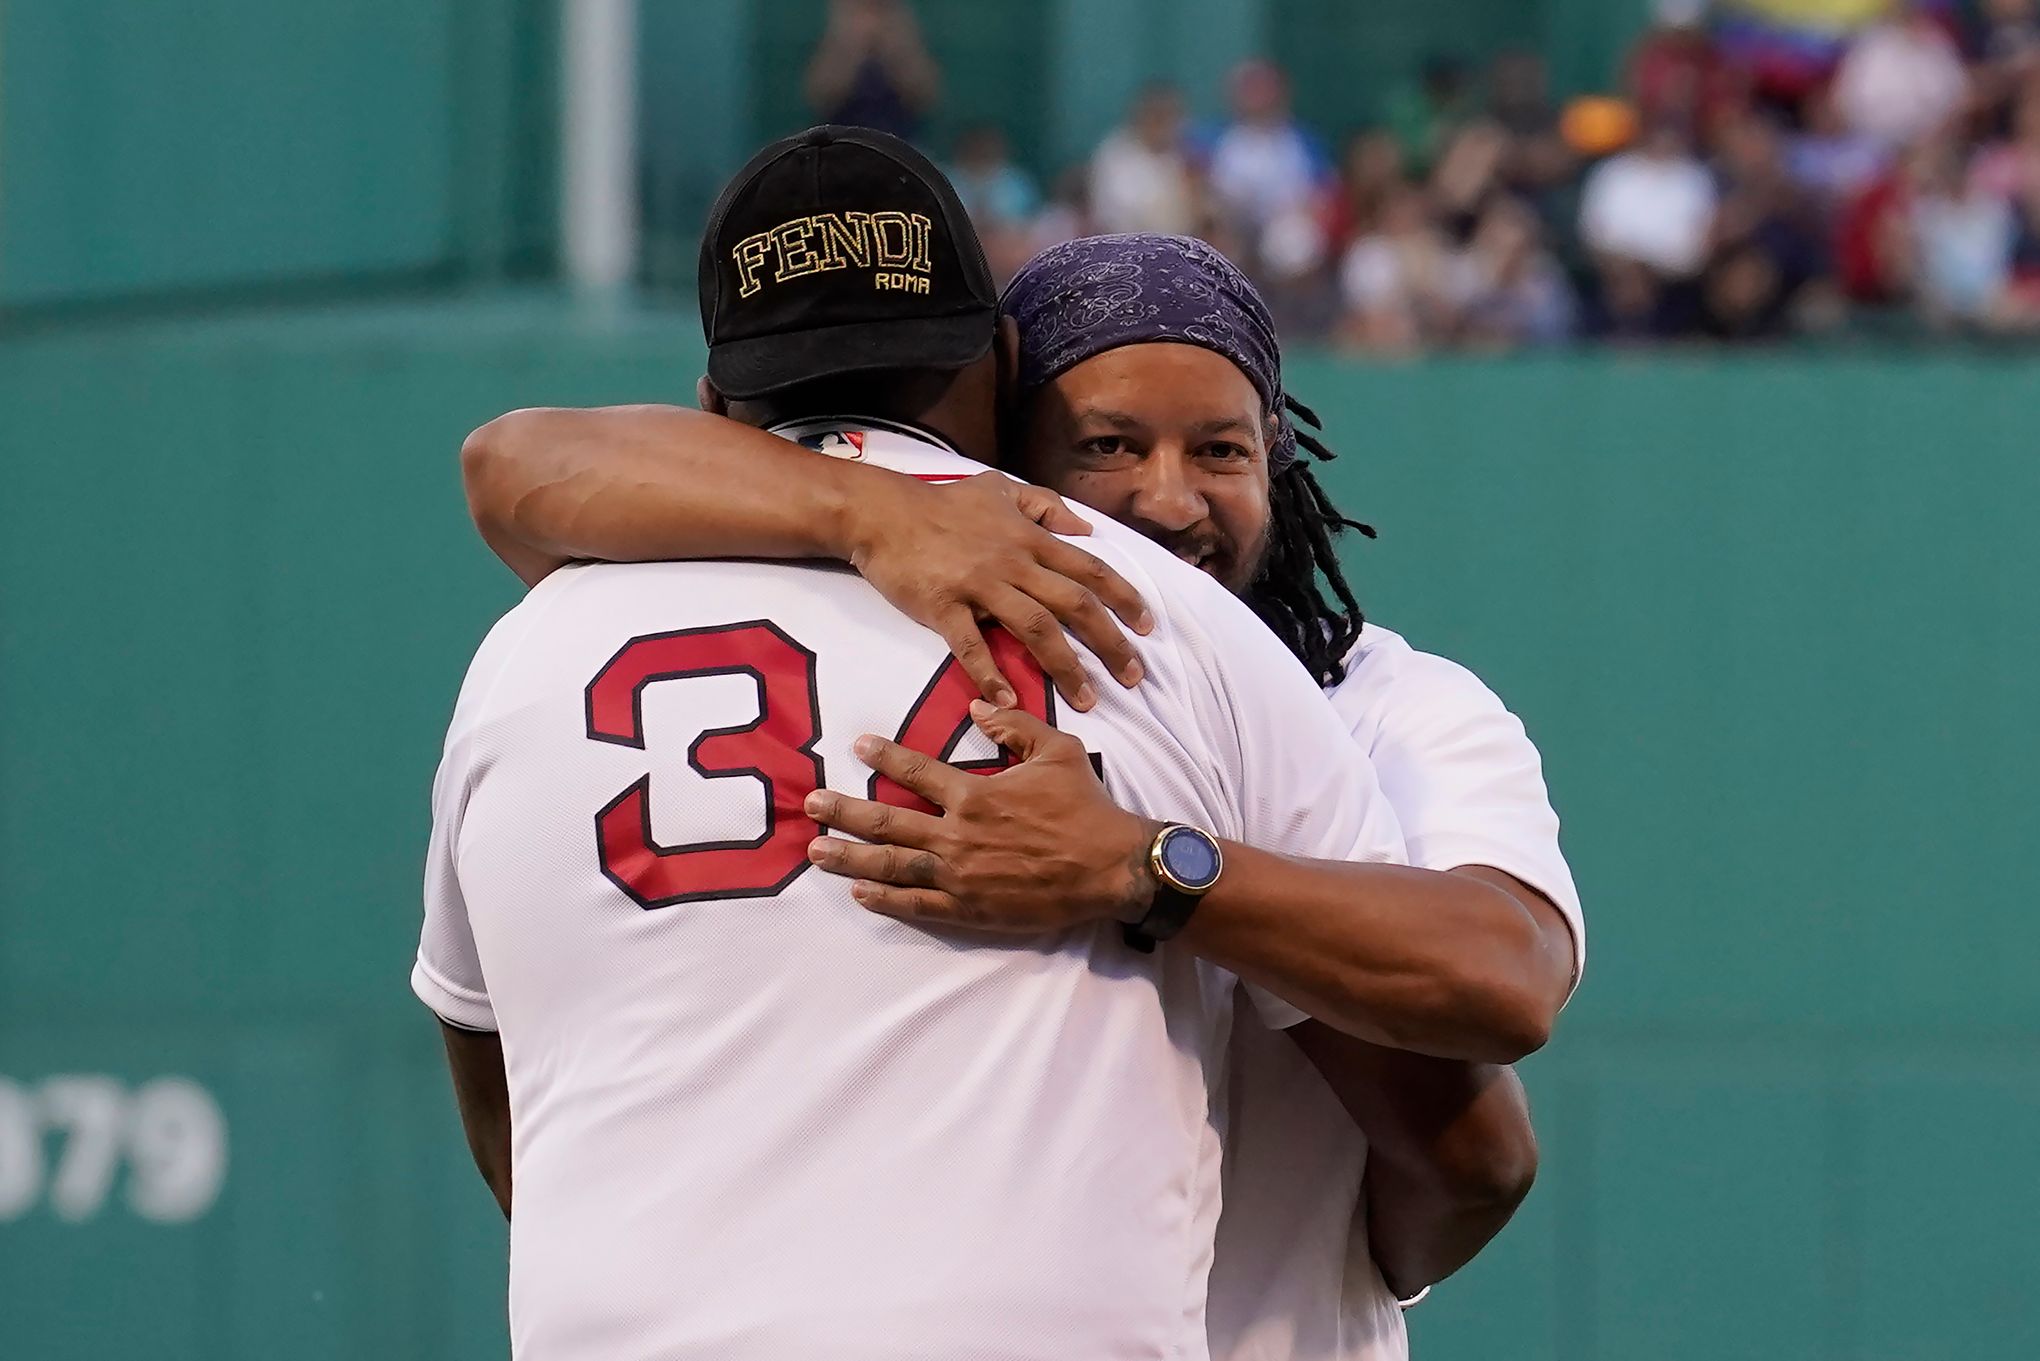 Gallery: Red Sox hall of famer Manny Ramirez honored with teammate